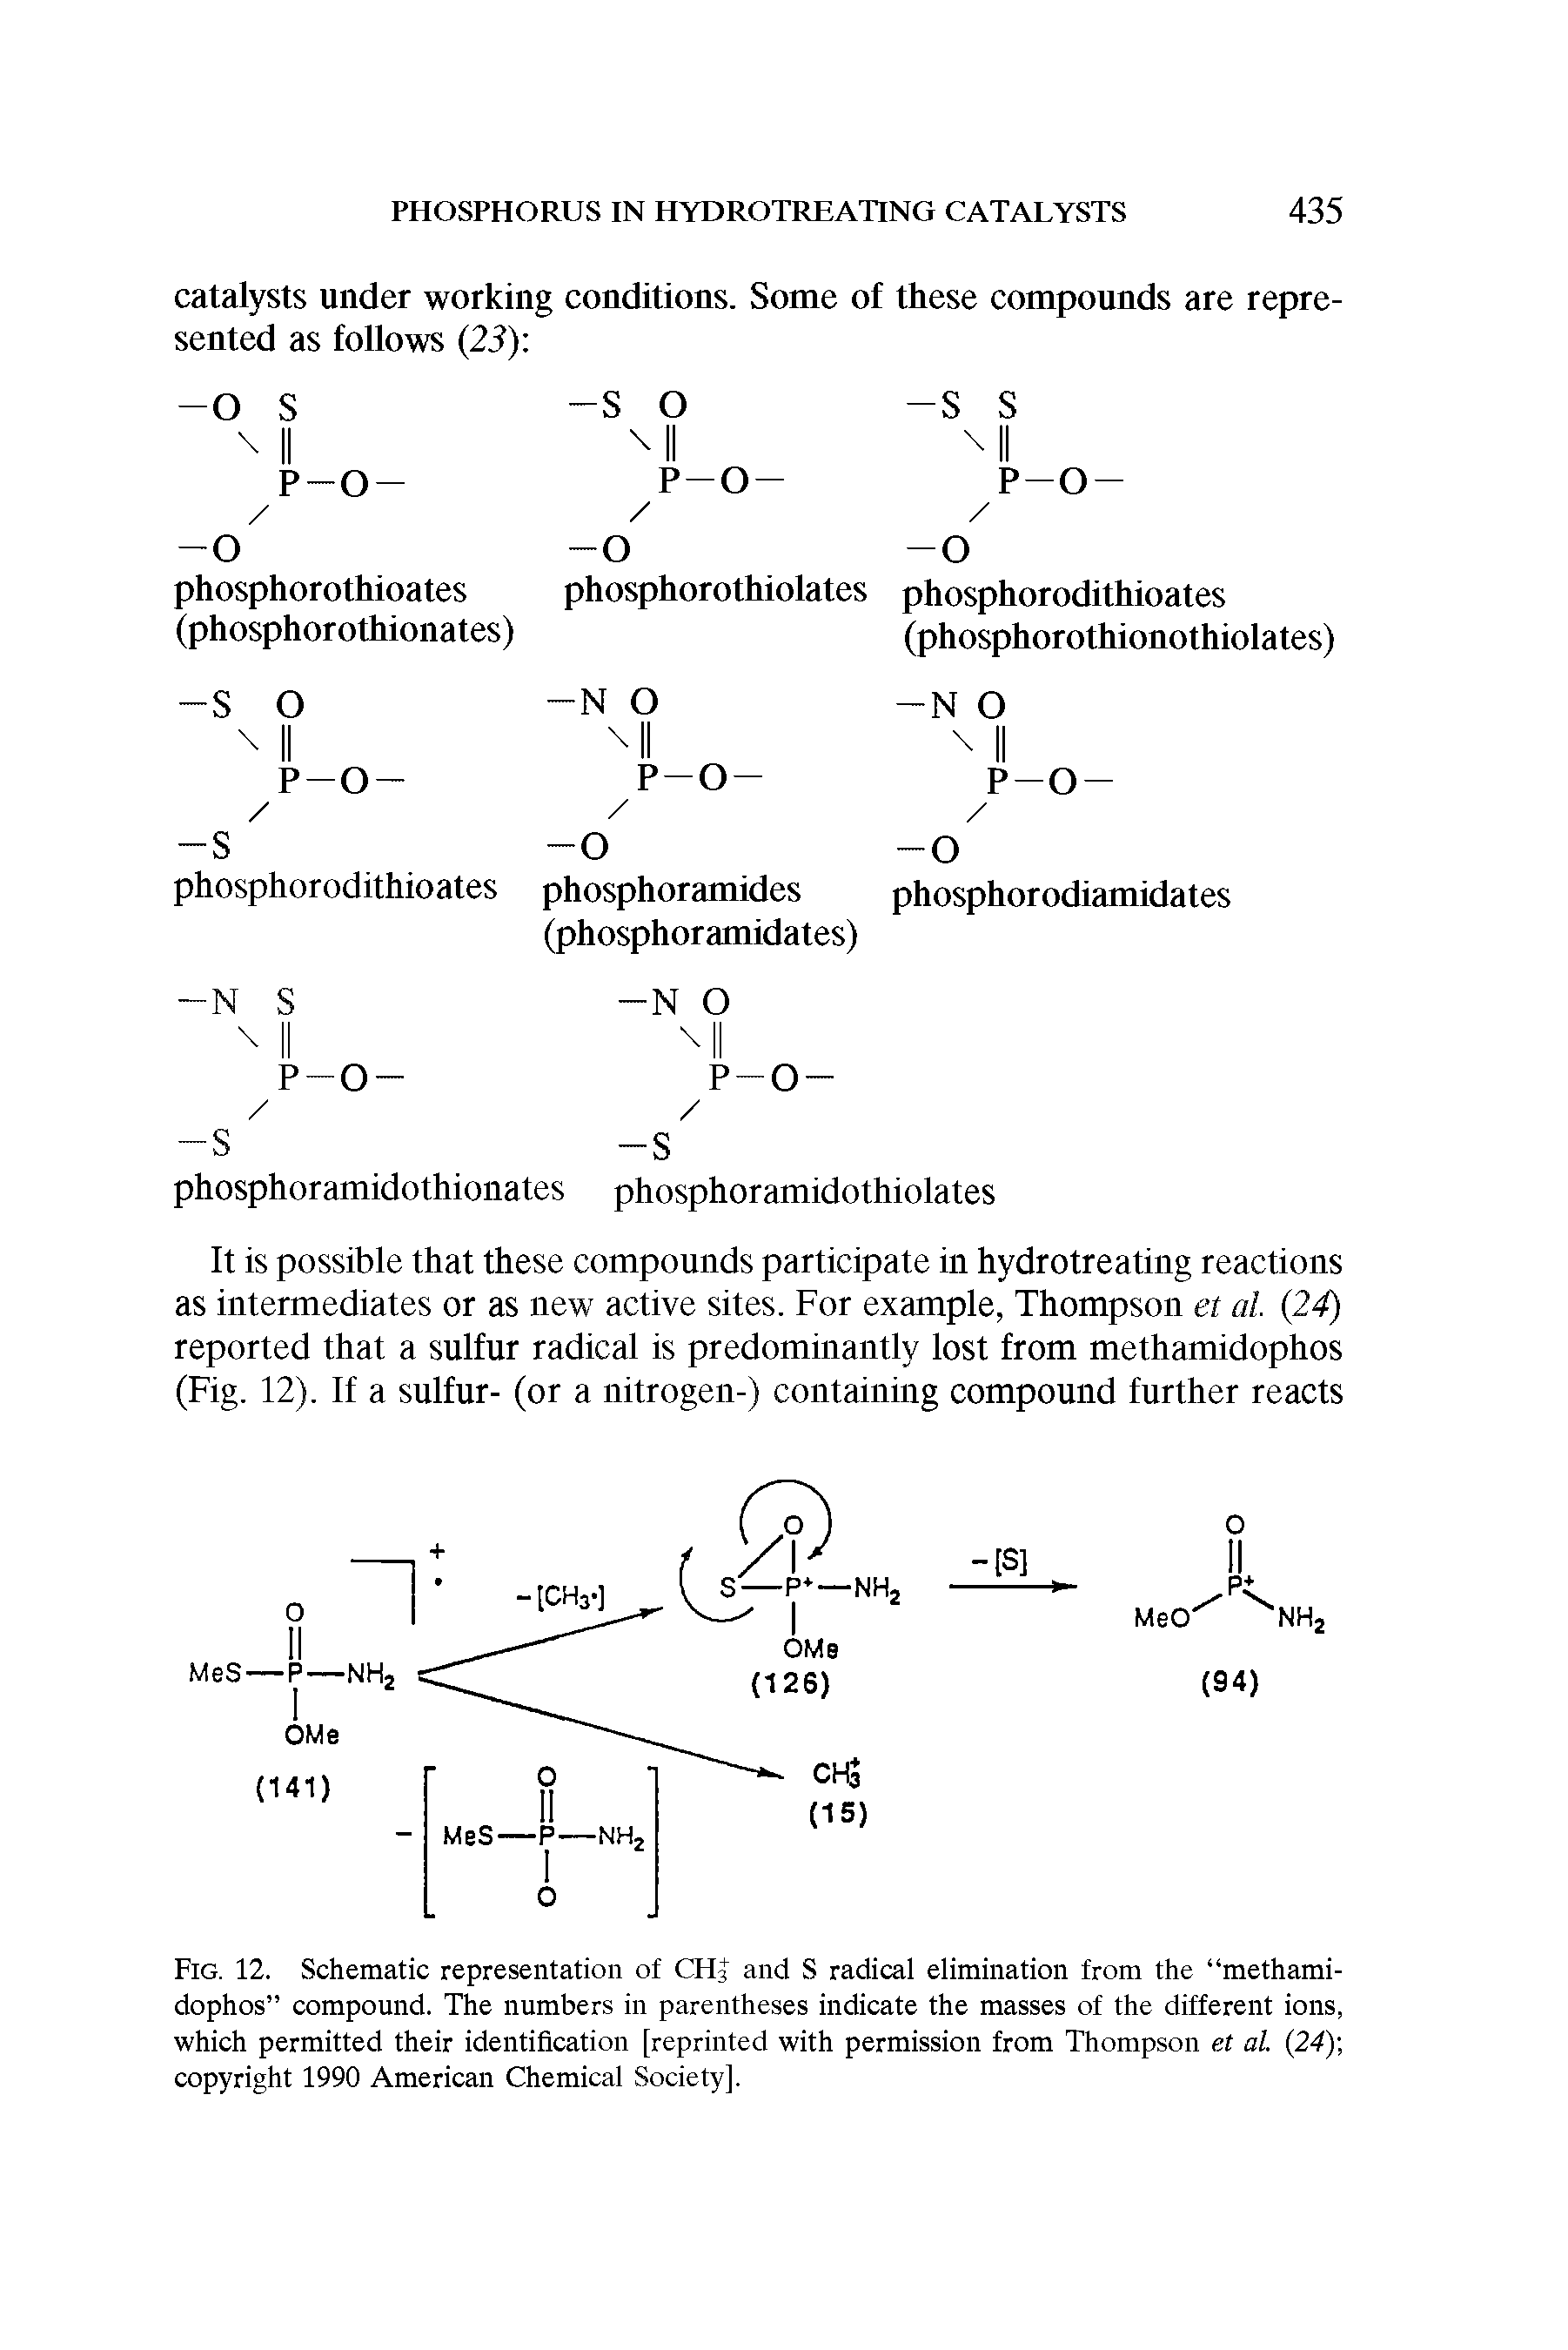 Fig. 12. Schematic representation of CHJ and S radical elimination from the methamidophos compound. The numbers in parentheses indicate the masses of the different ions, which permitted their identification [reprinted with permission from Thompson et al. 24) copyright 1990 American Chemical Society].